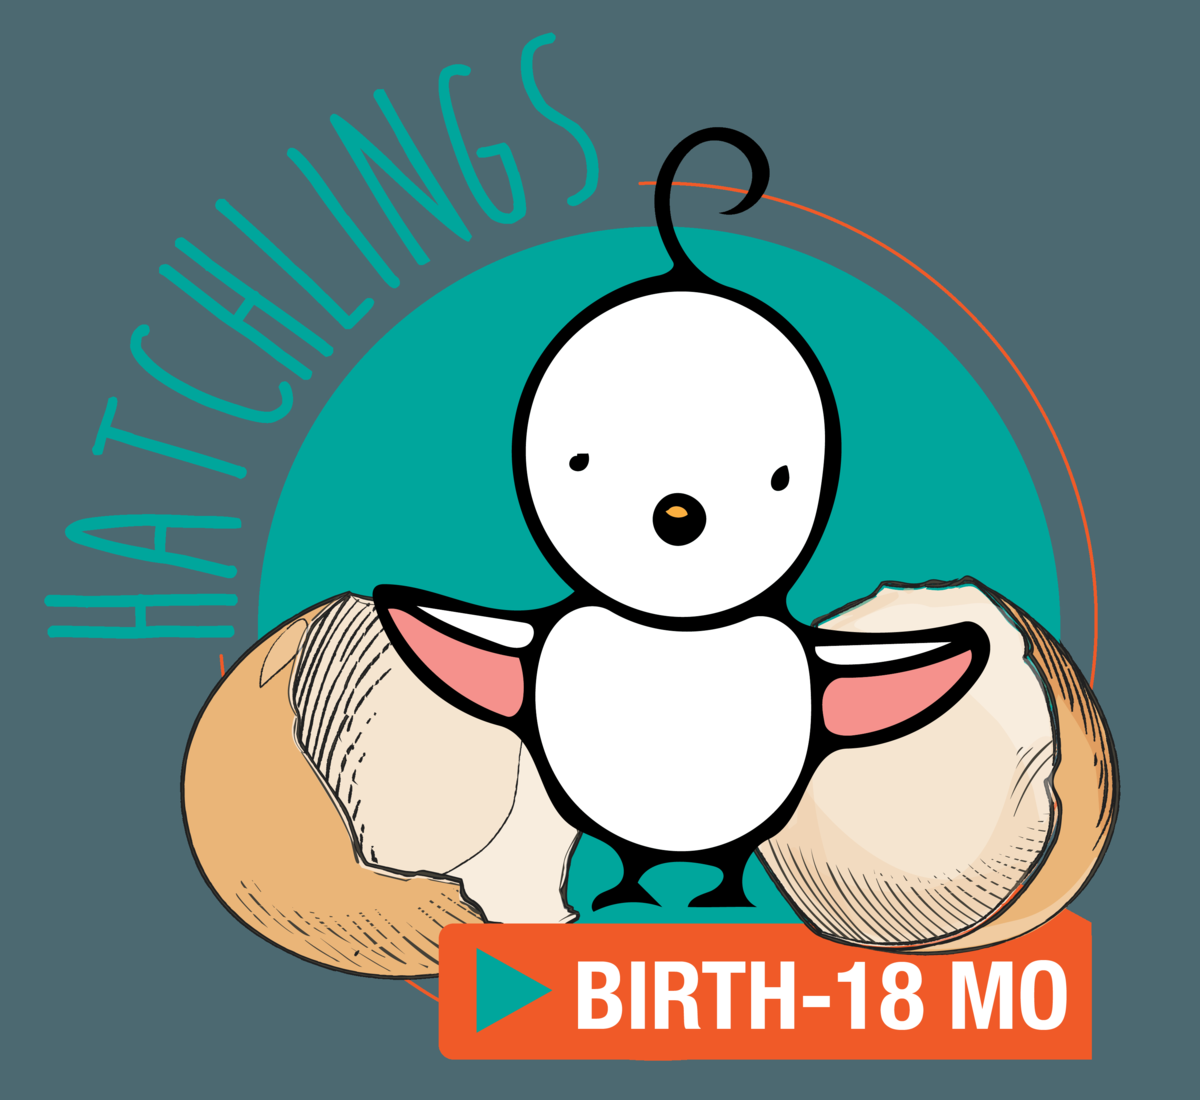 Storytime Rhyme Time birth - 24 months